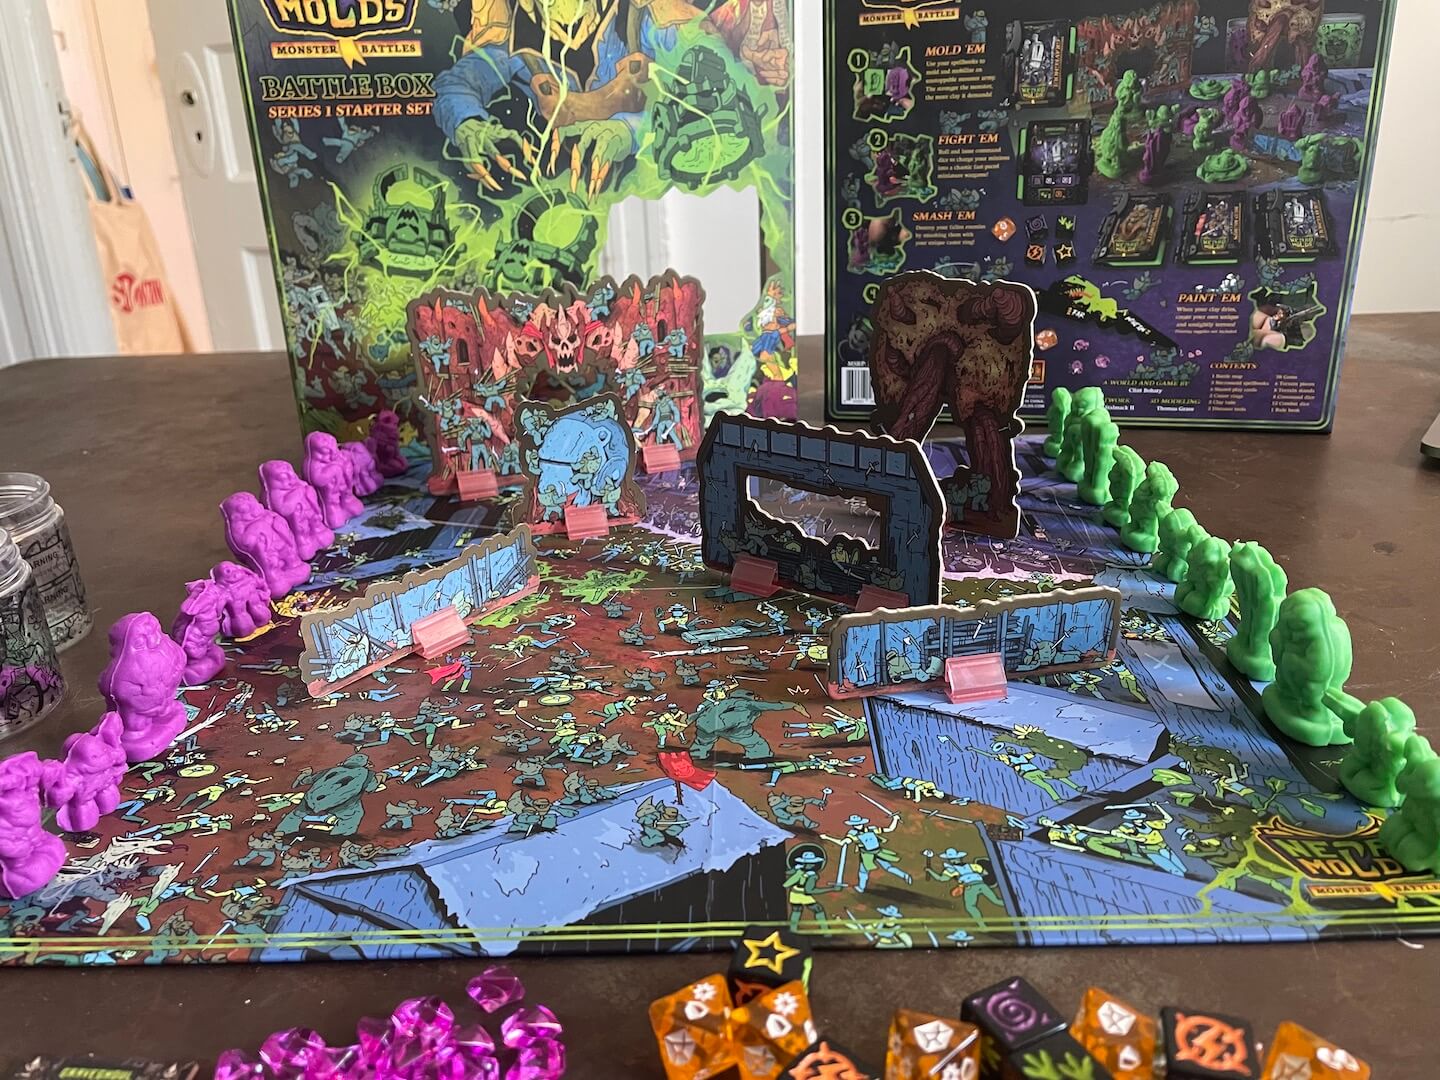 A full table set up and ready for a round of Necromolds